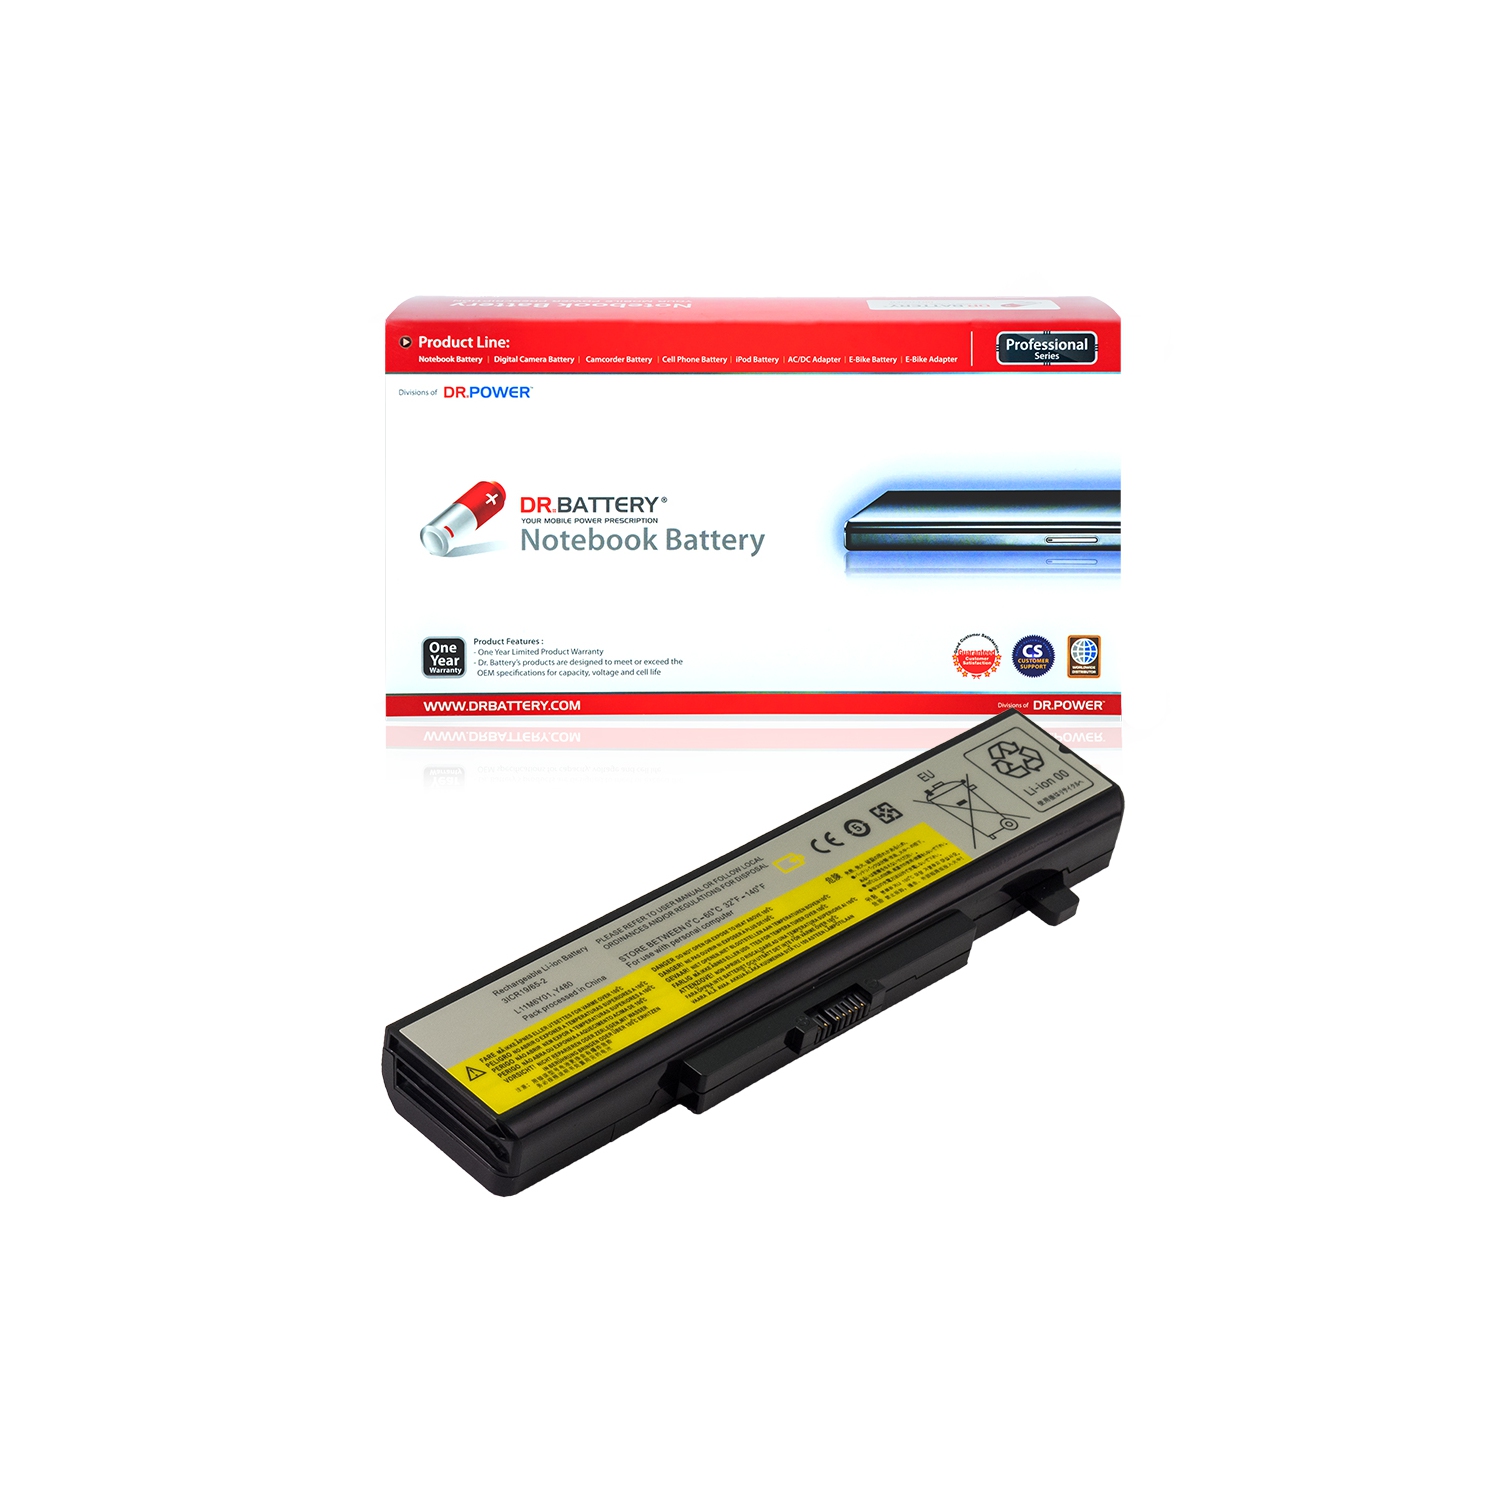 DR. BATTERY - Replacement for Lenovo IdeaPad Z380 / Z480 / Z485 / Z580 / Z585 / L11L6Y01 / L11M6F01 / L11M6Y01 / L11N6R01